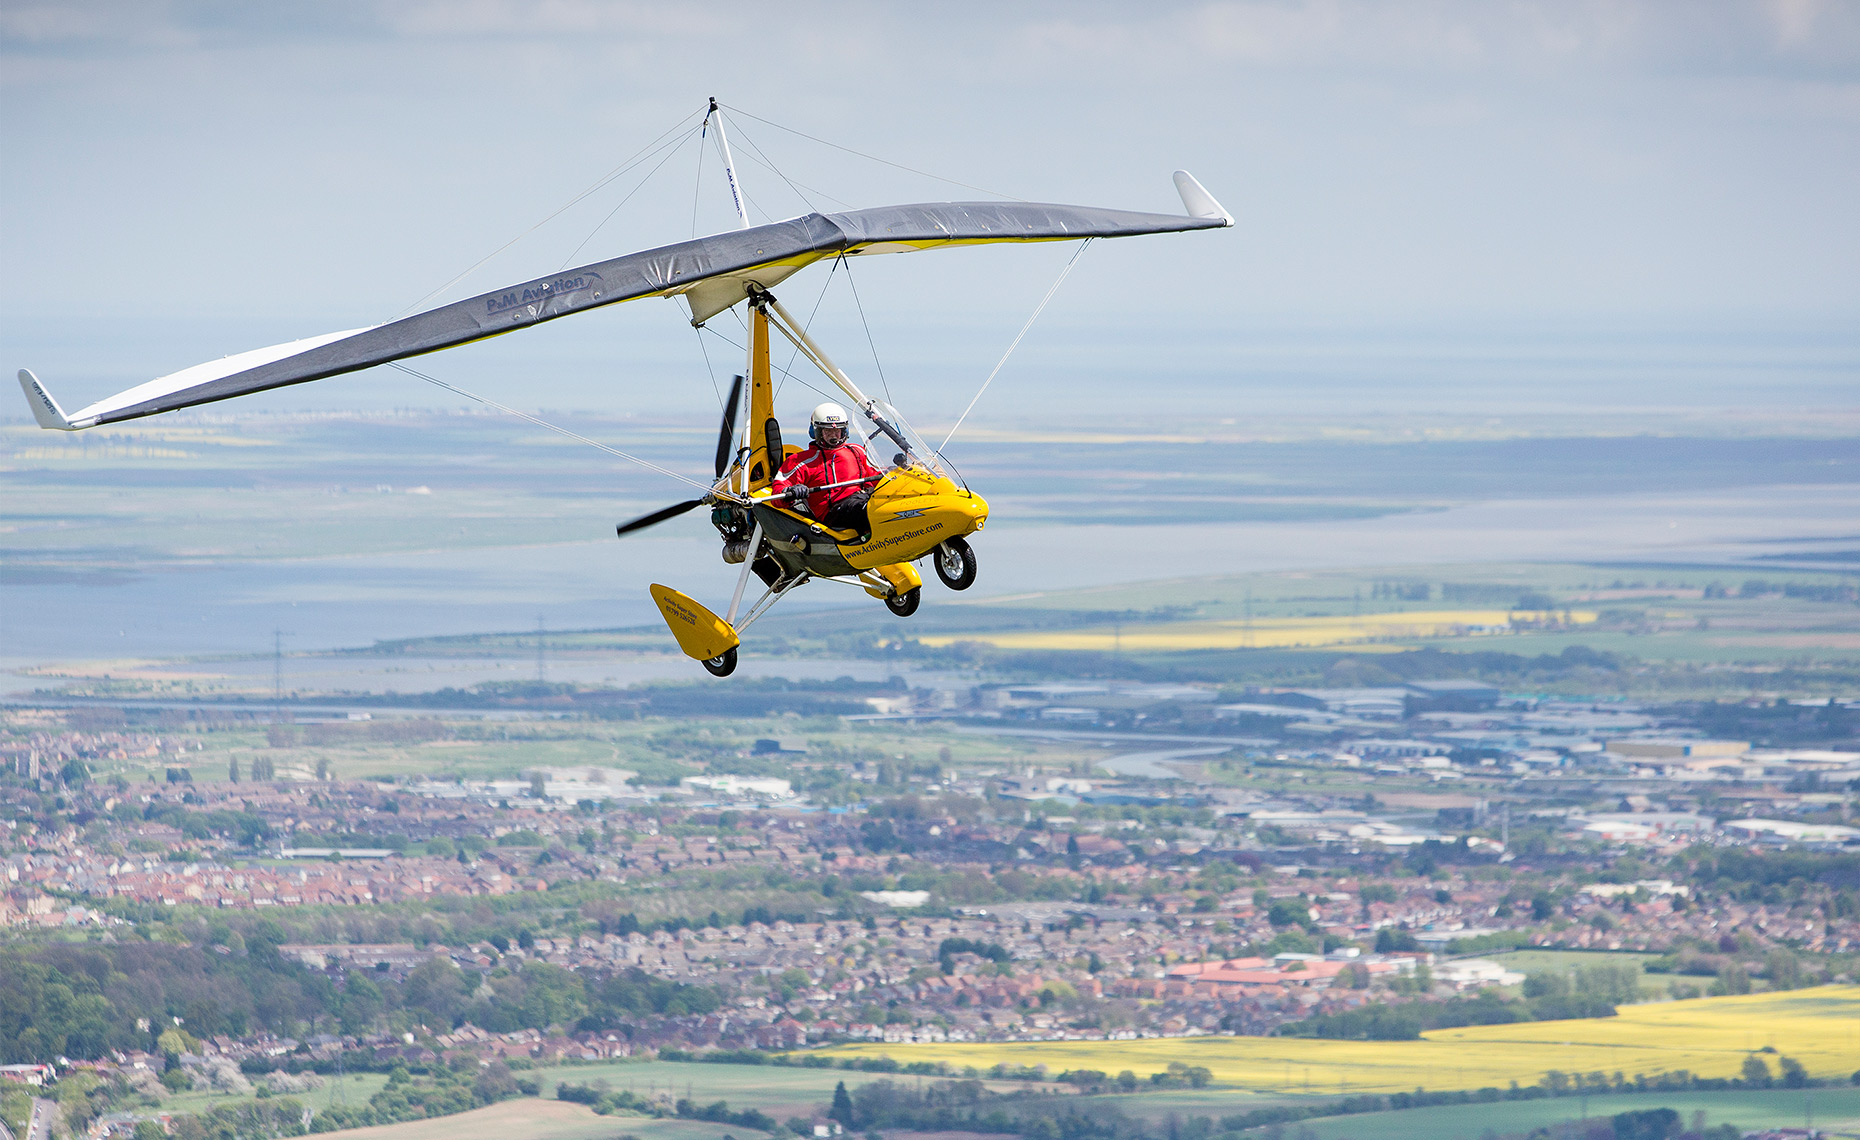  Air to air photography of a Microlight flying over Medway in Kent.